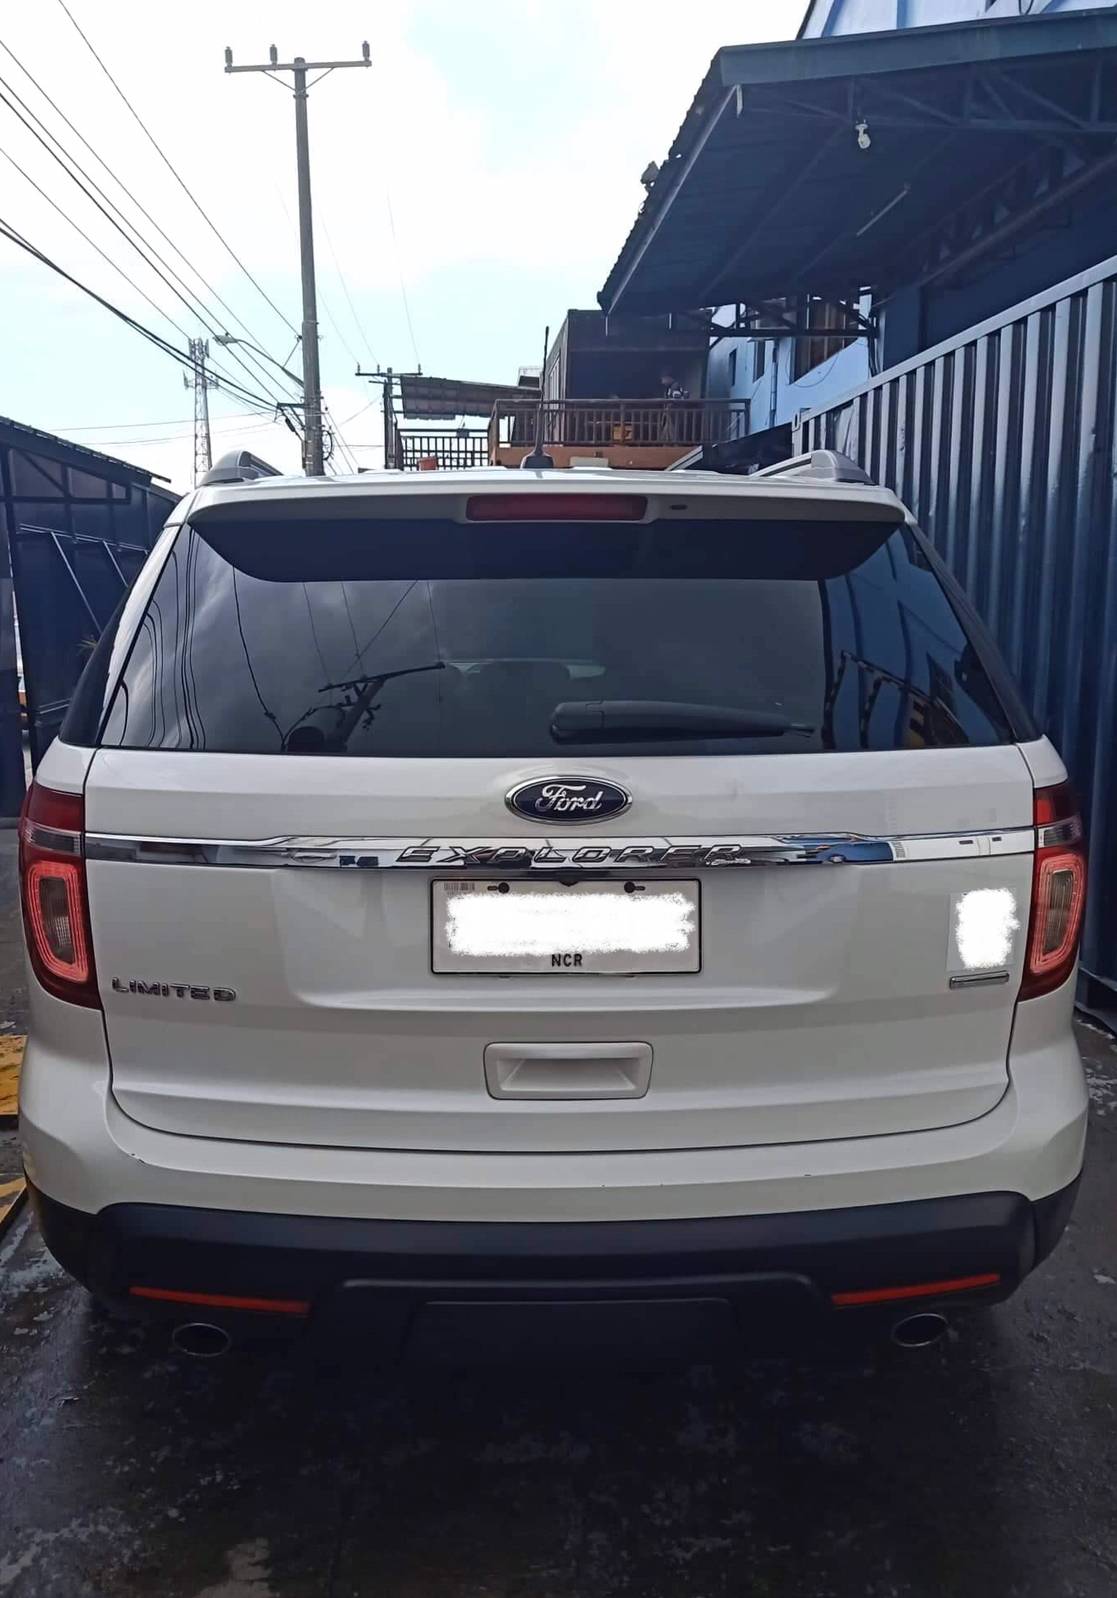 Second hand 2014 Ford Explorer 3.5L 4x4 Limited+